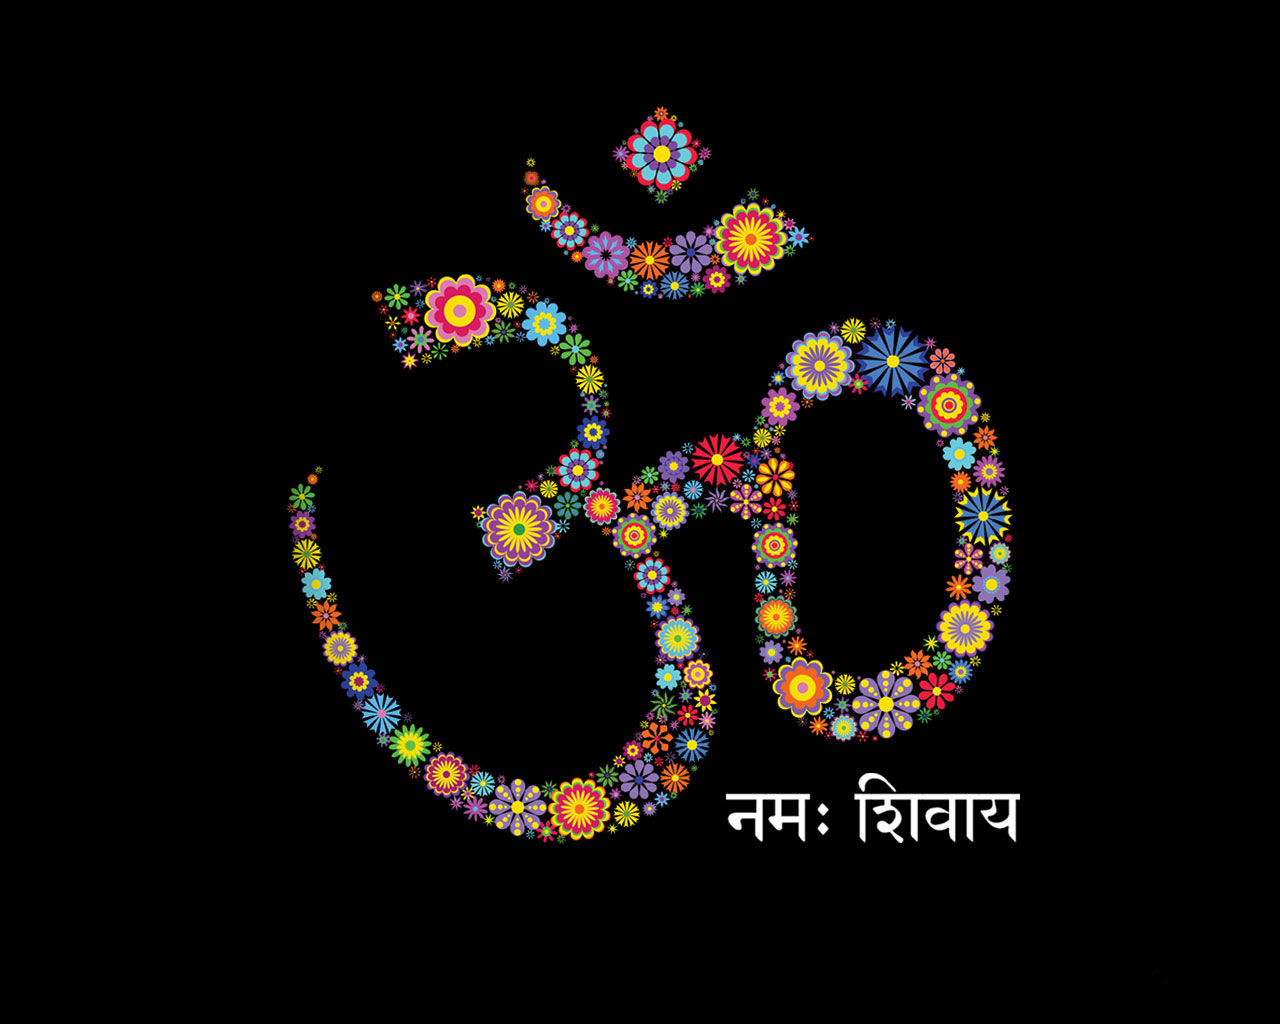 Om latest hd wallpaper | Only hd wallpapers